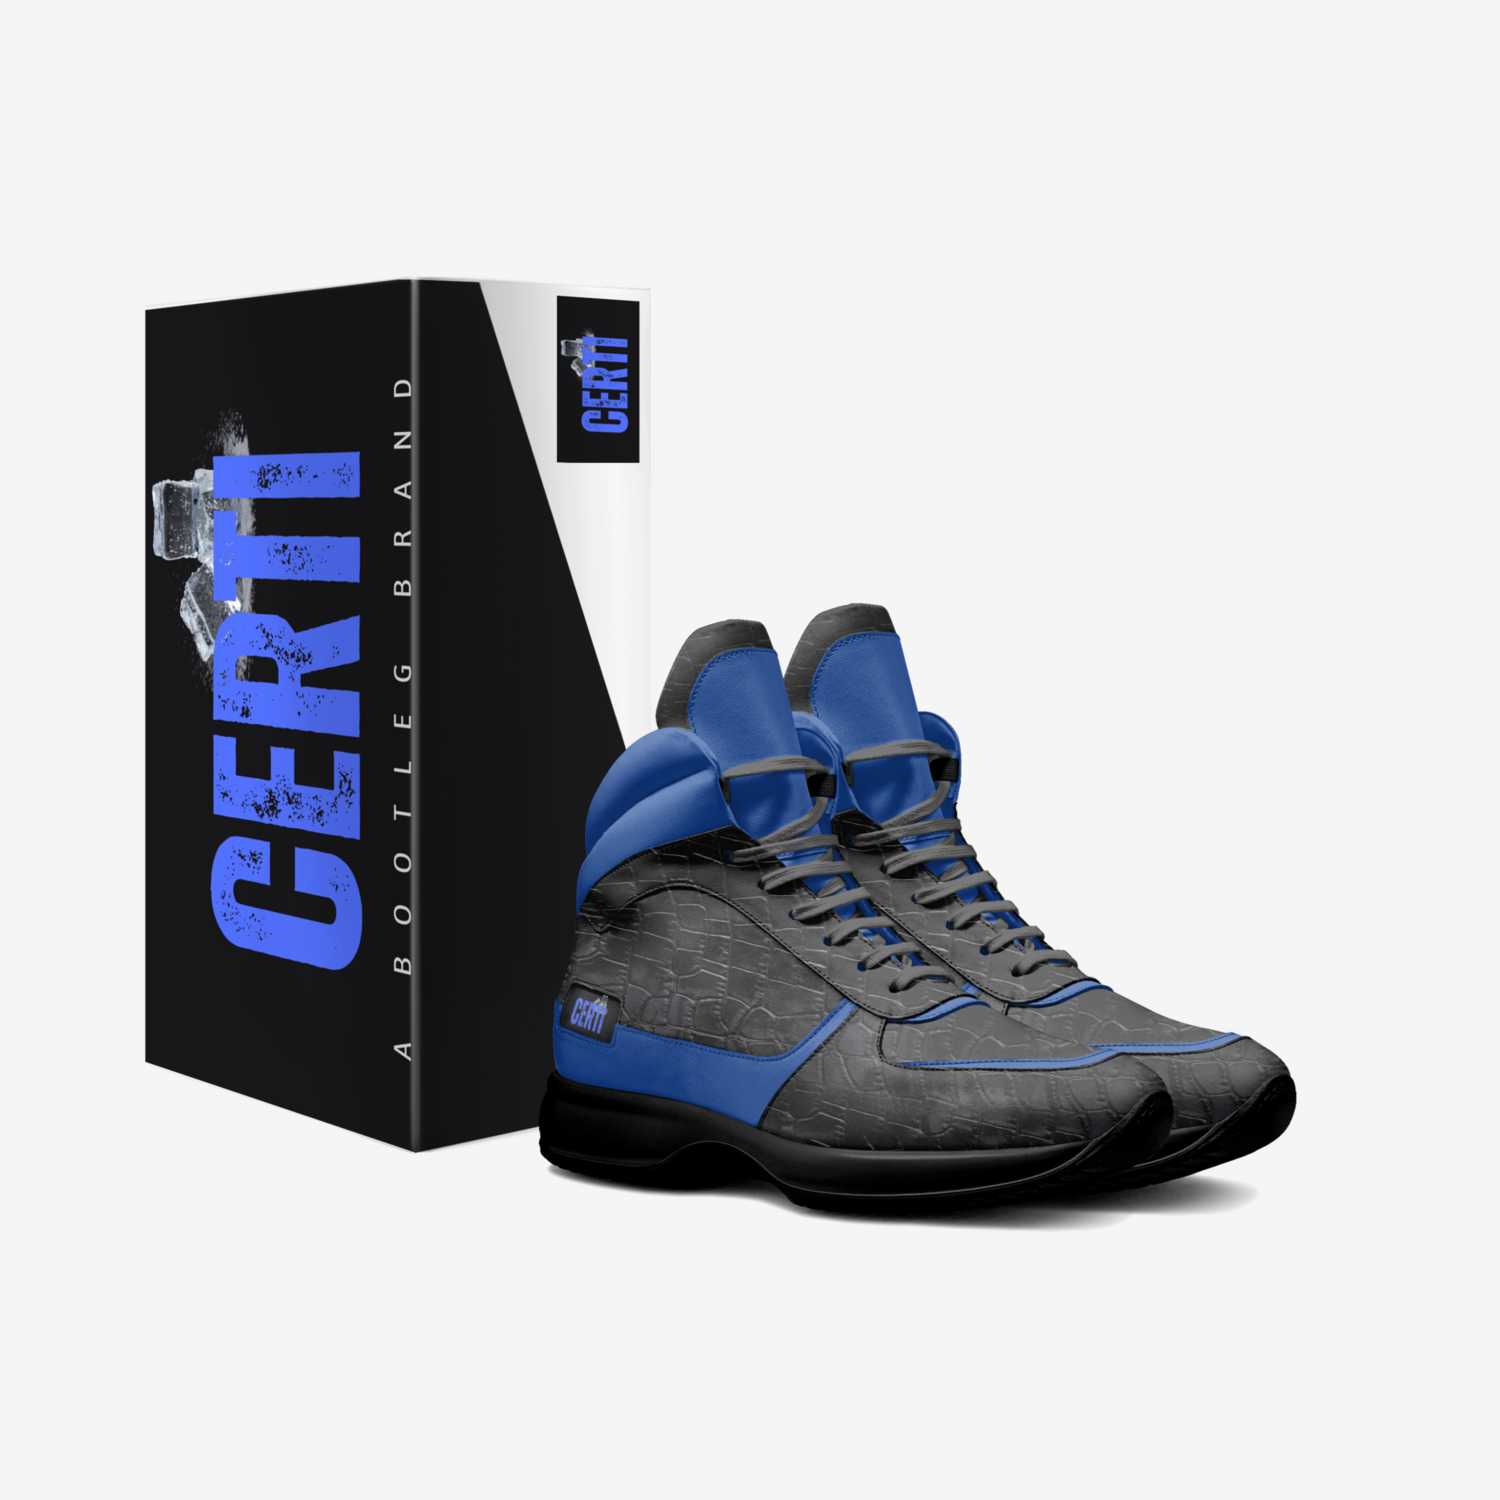 CERTI' custom made in Italy shoes by A Bootleg Brand | Box view